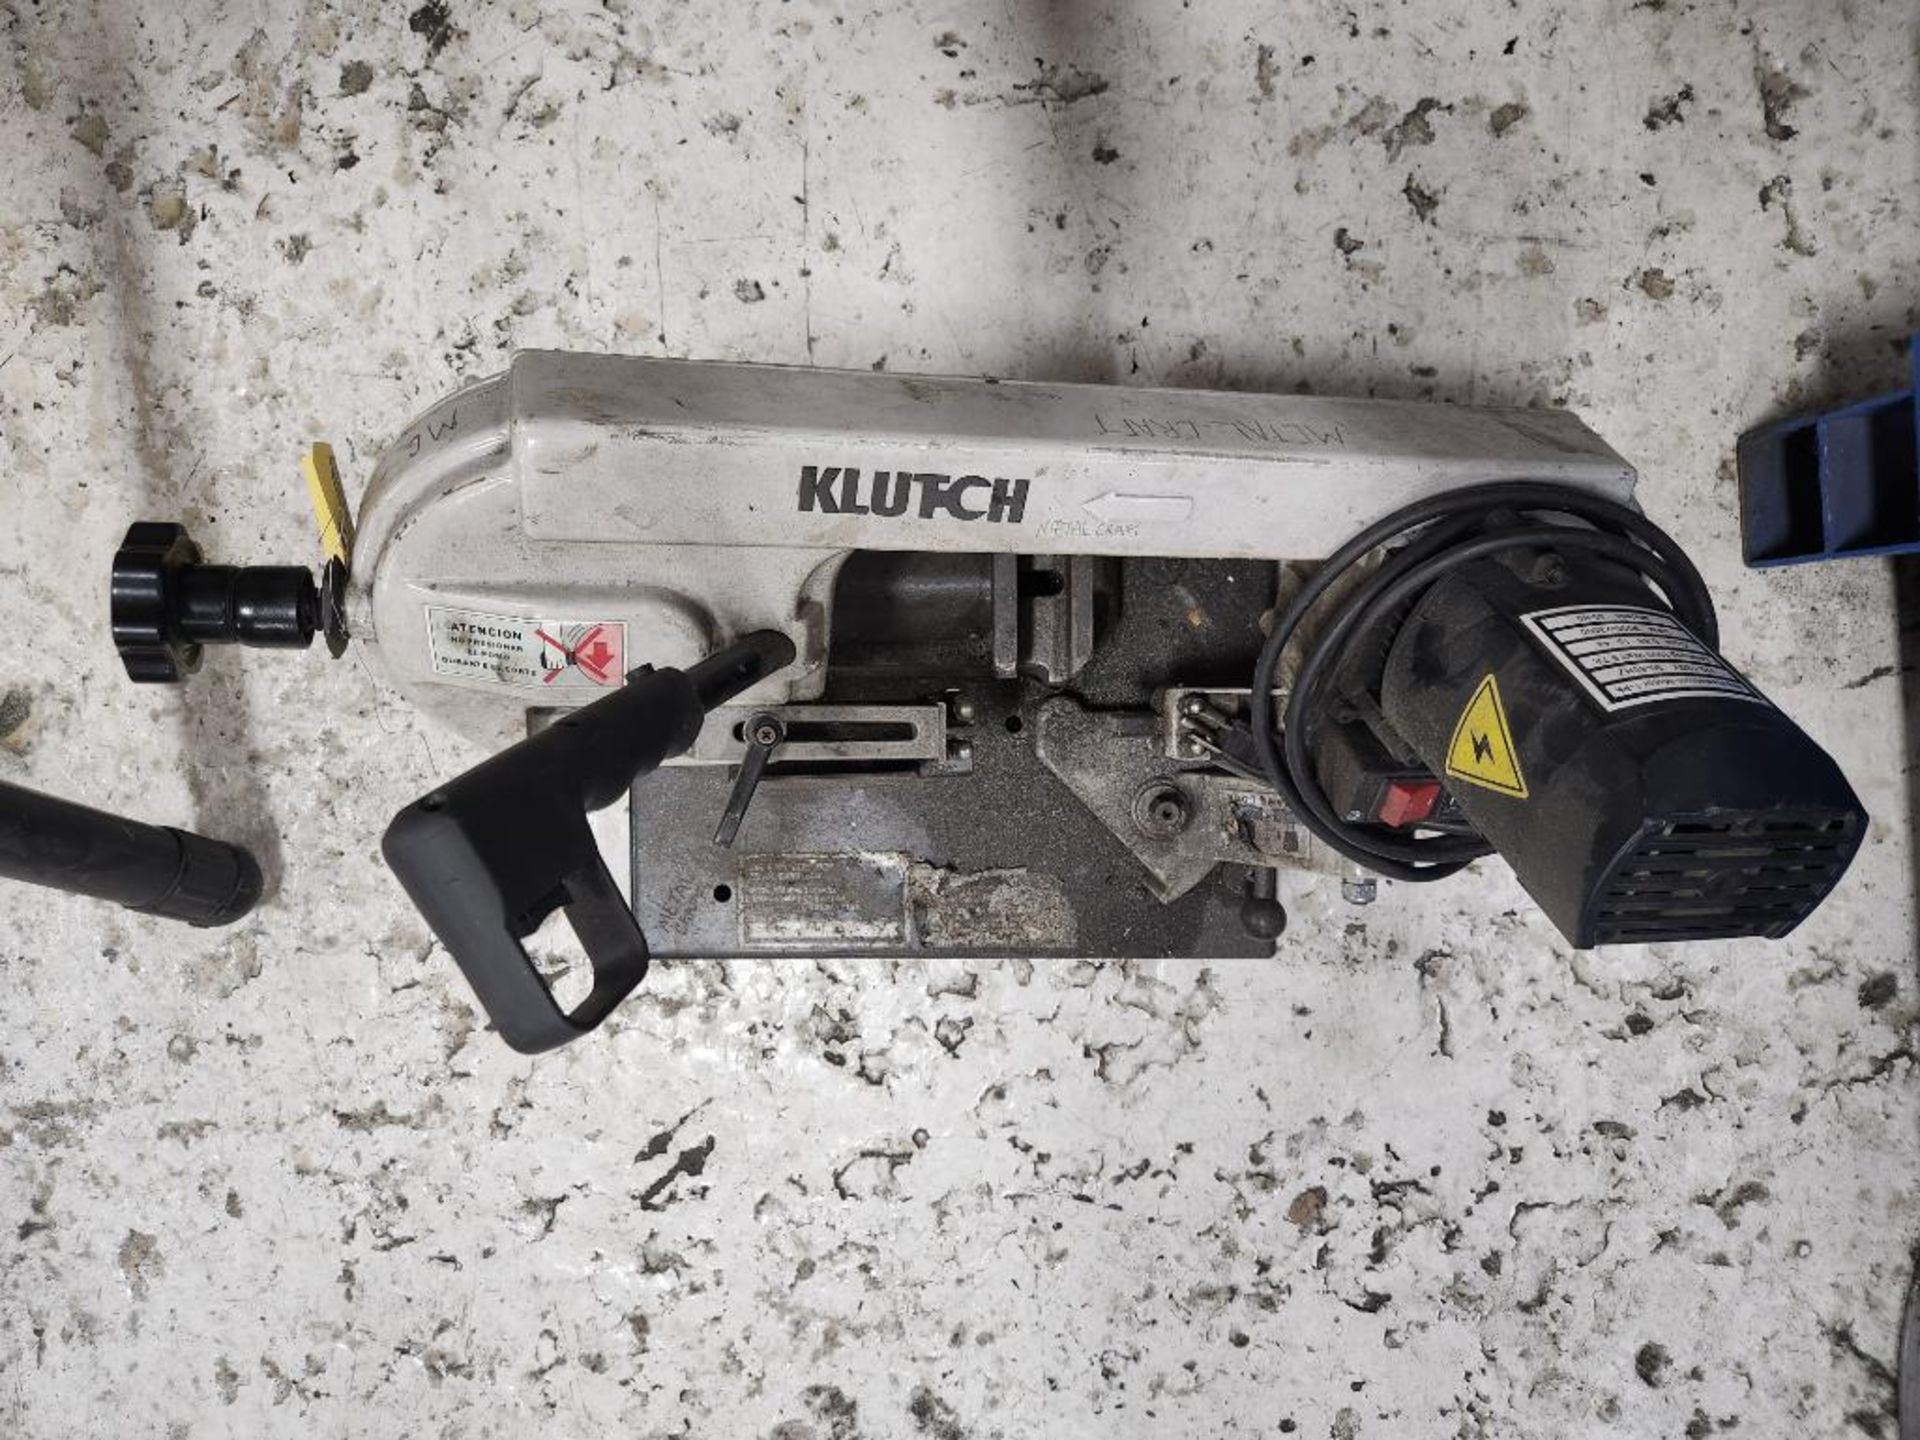 Klutch Bench Top Band Saw, 52" Blade, 3" - 4" Cut Capacity, Model 49466, S/N A18012029 - Image 4 of 4